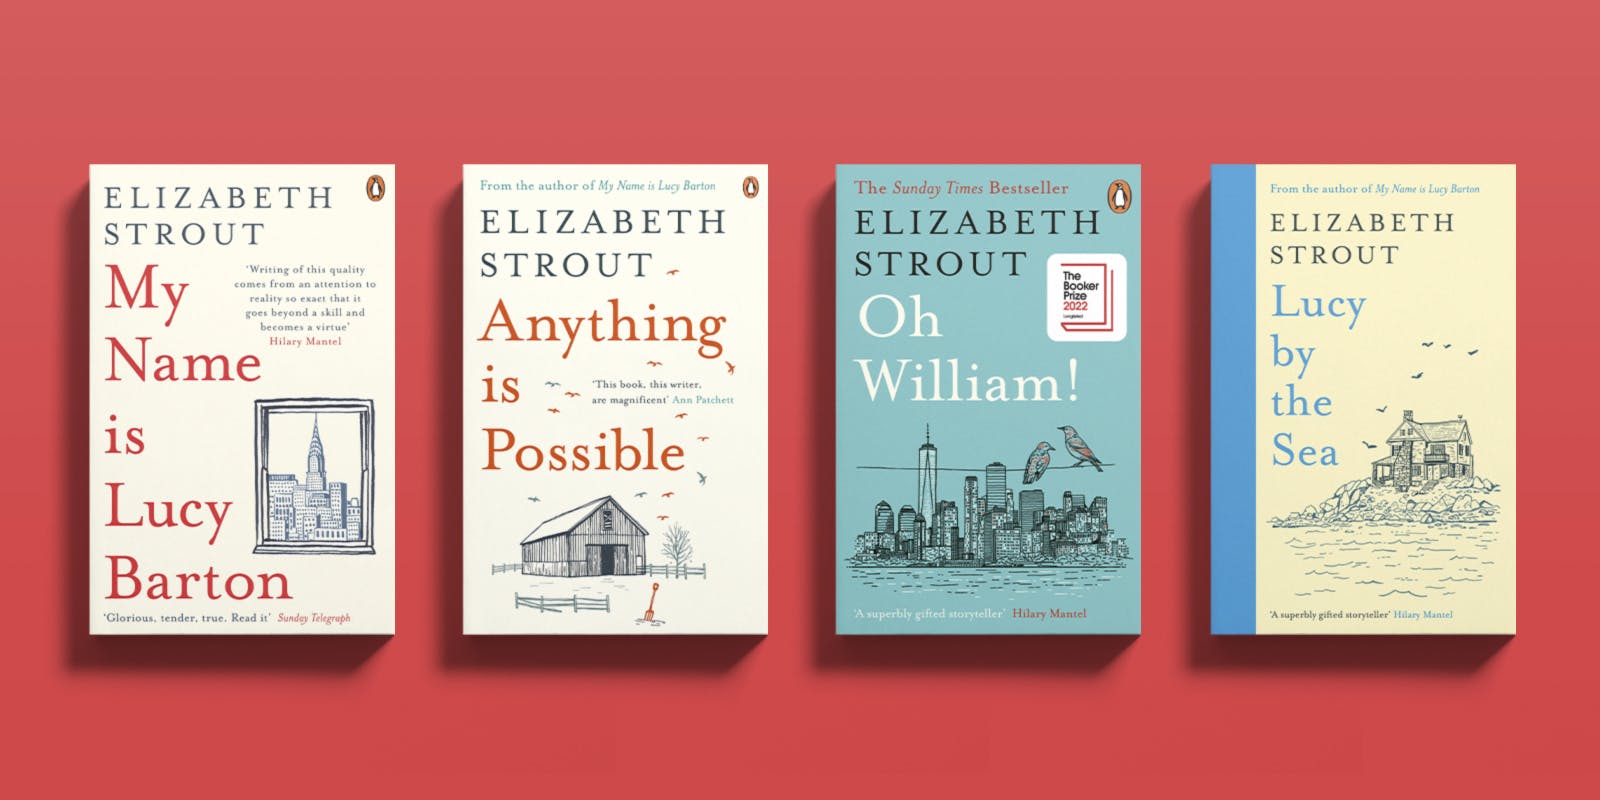 A useful guide to reading Elizabeth Strout’s Lucy Barton books